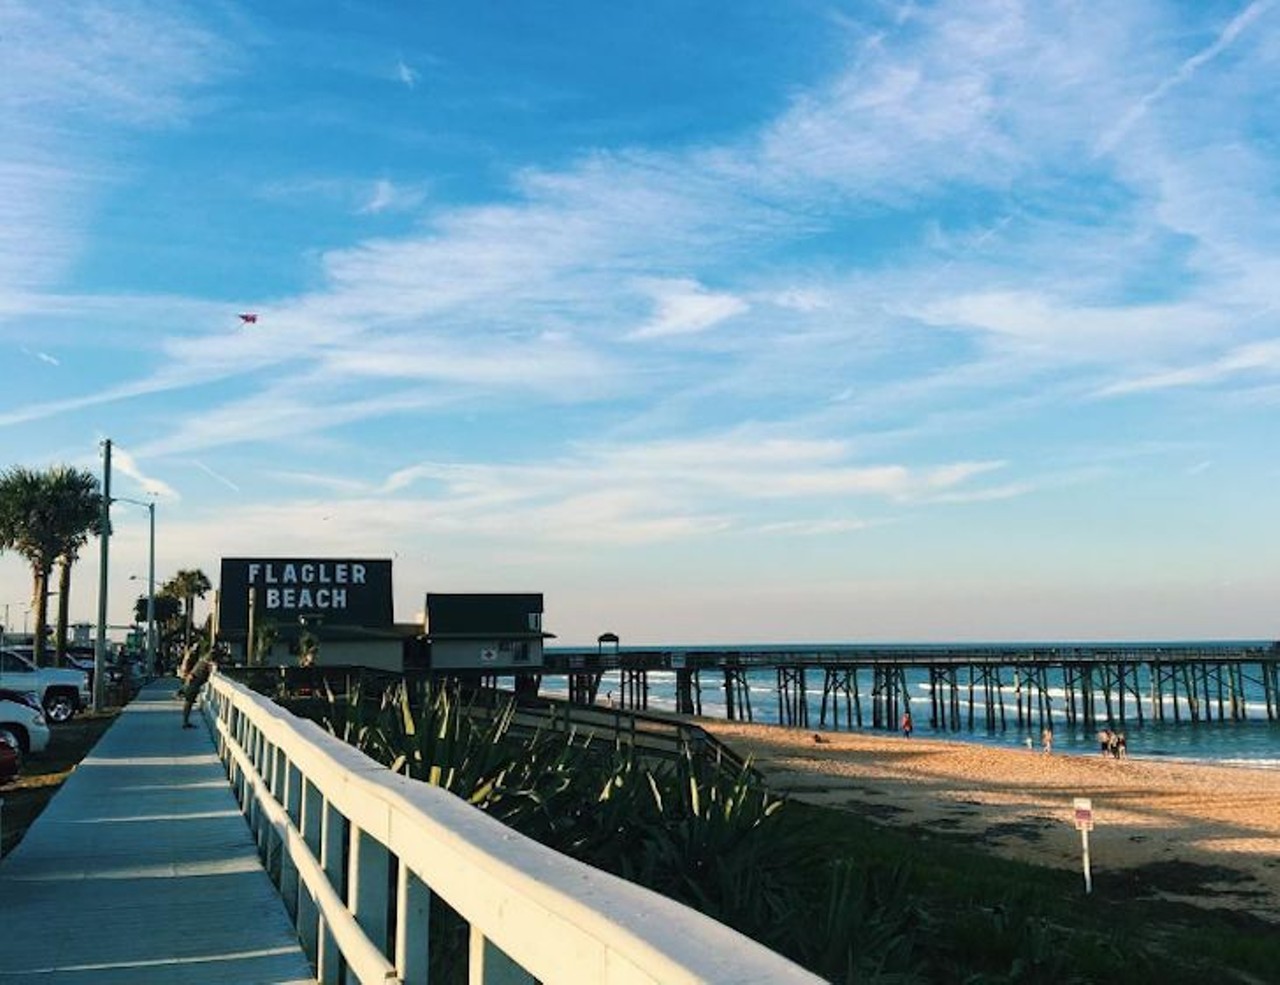 Flagler Beach
1 hour, 20 minutes away
This retro beach town has a salty style all its own, with free access to over six miles of killer ocean views, eclectic seaside shops and plenty of open-air restaurants on the shore where you can grab a snack after a swim. 
Photo via alexisjean386/Instagram